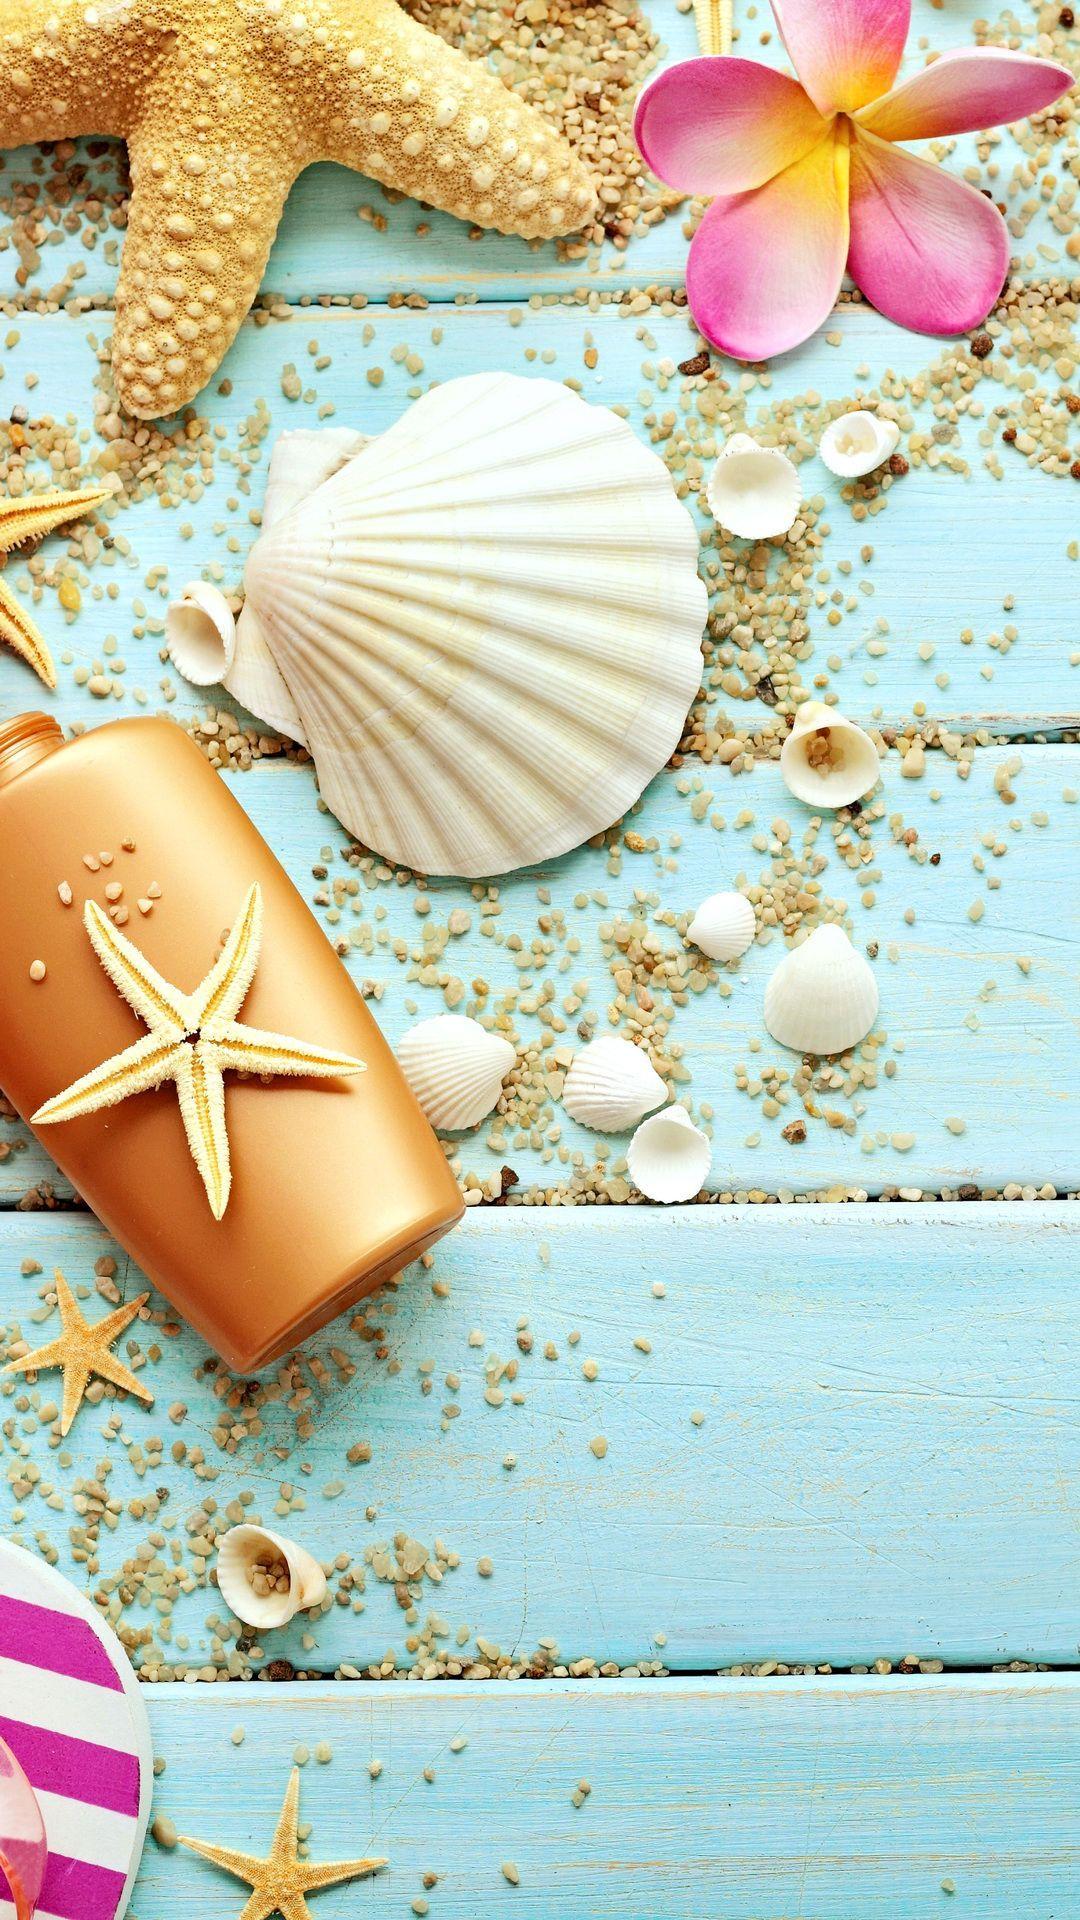 Seashell Background Images HD Pictures and Wallpaper For Free Download   Pngtree